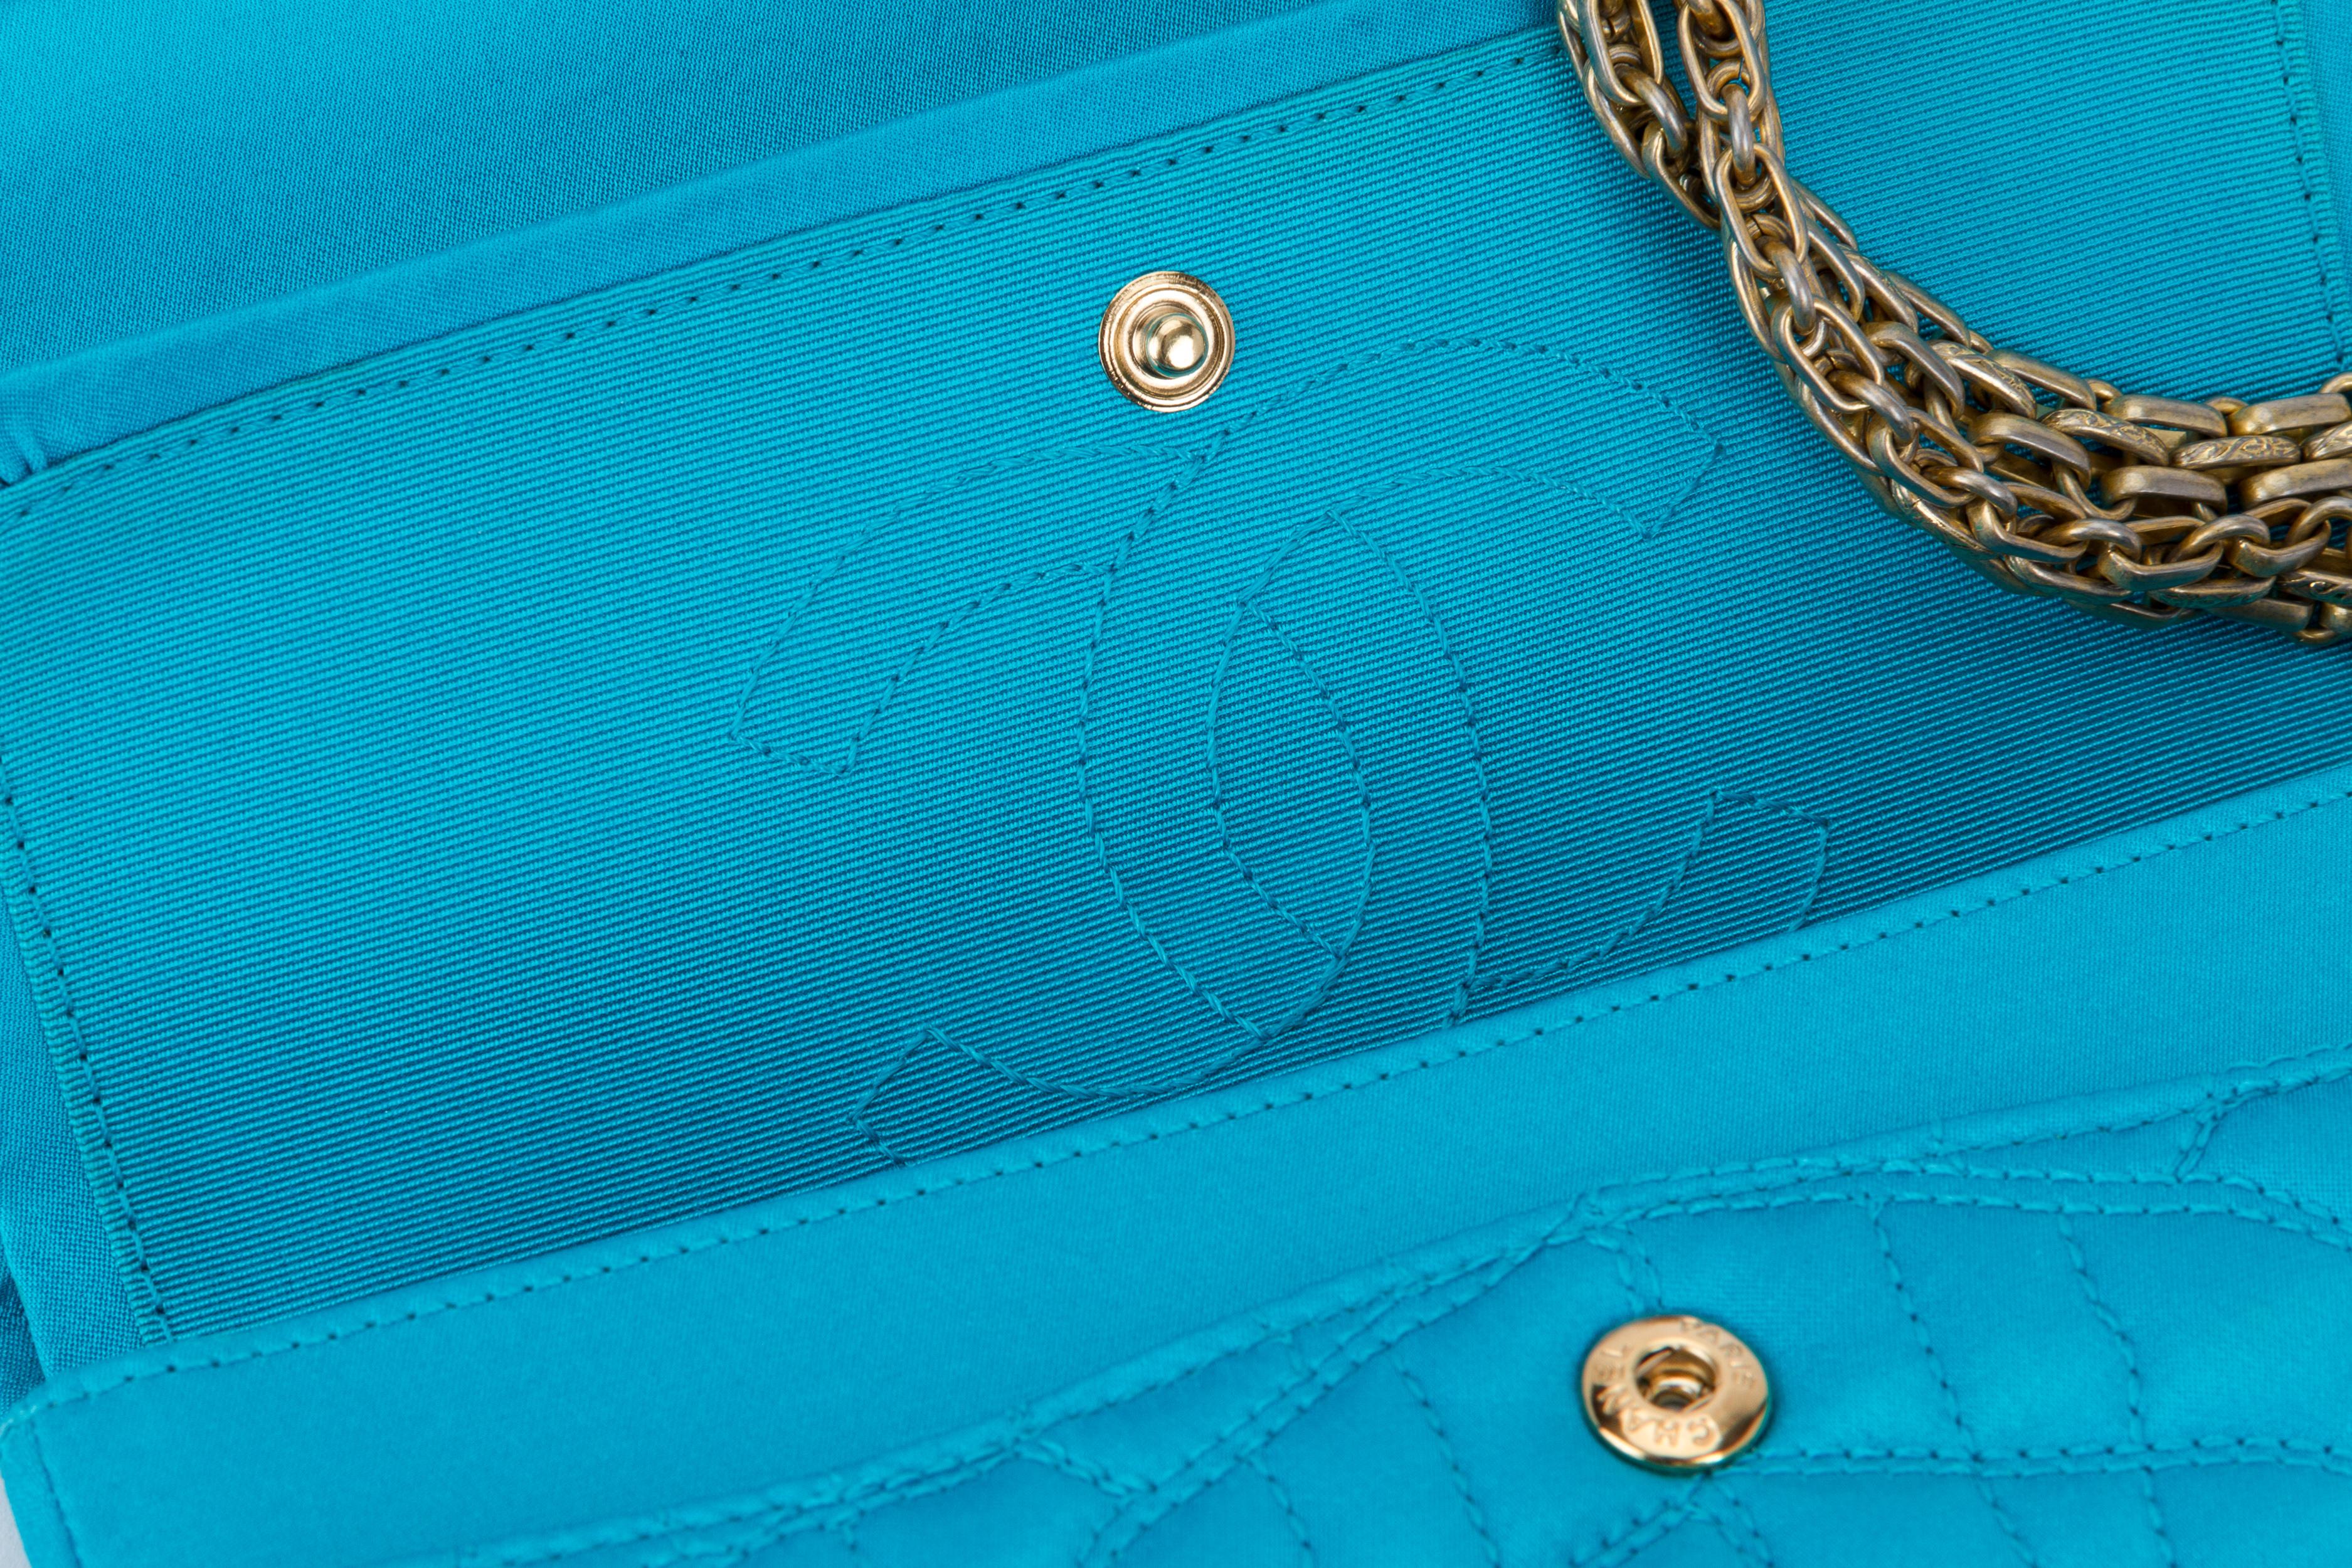 Chanel Silk Croc Embossed Turquoise Flap Bag 7